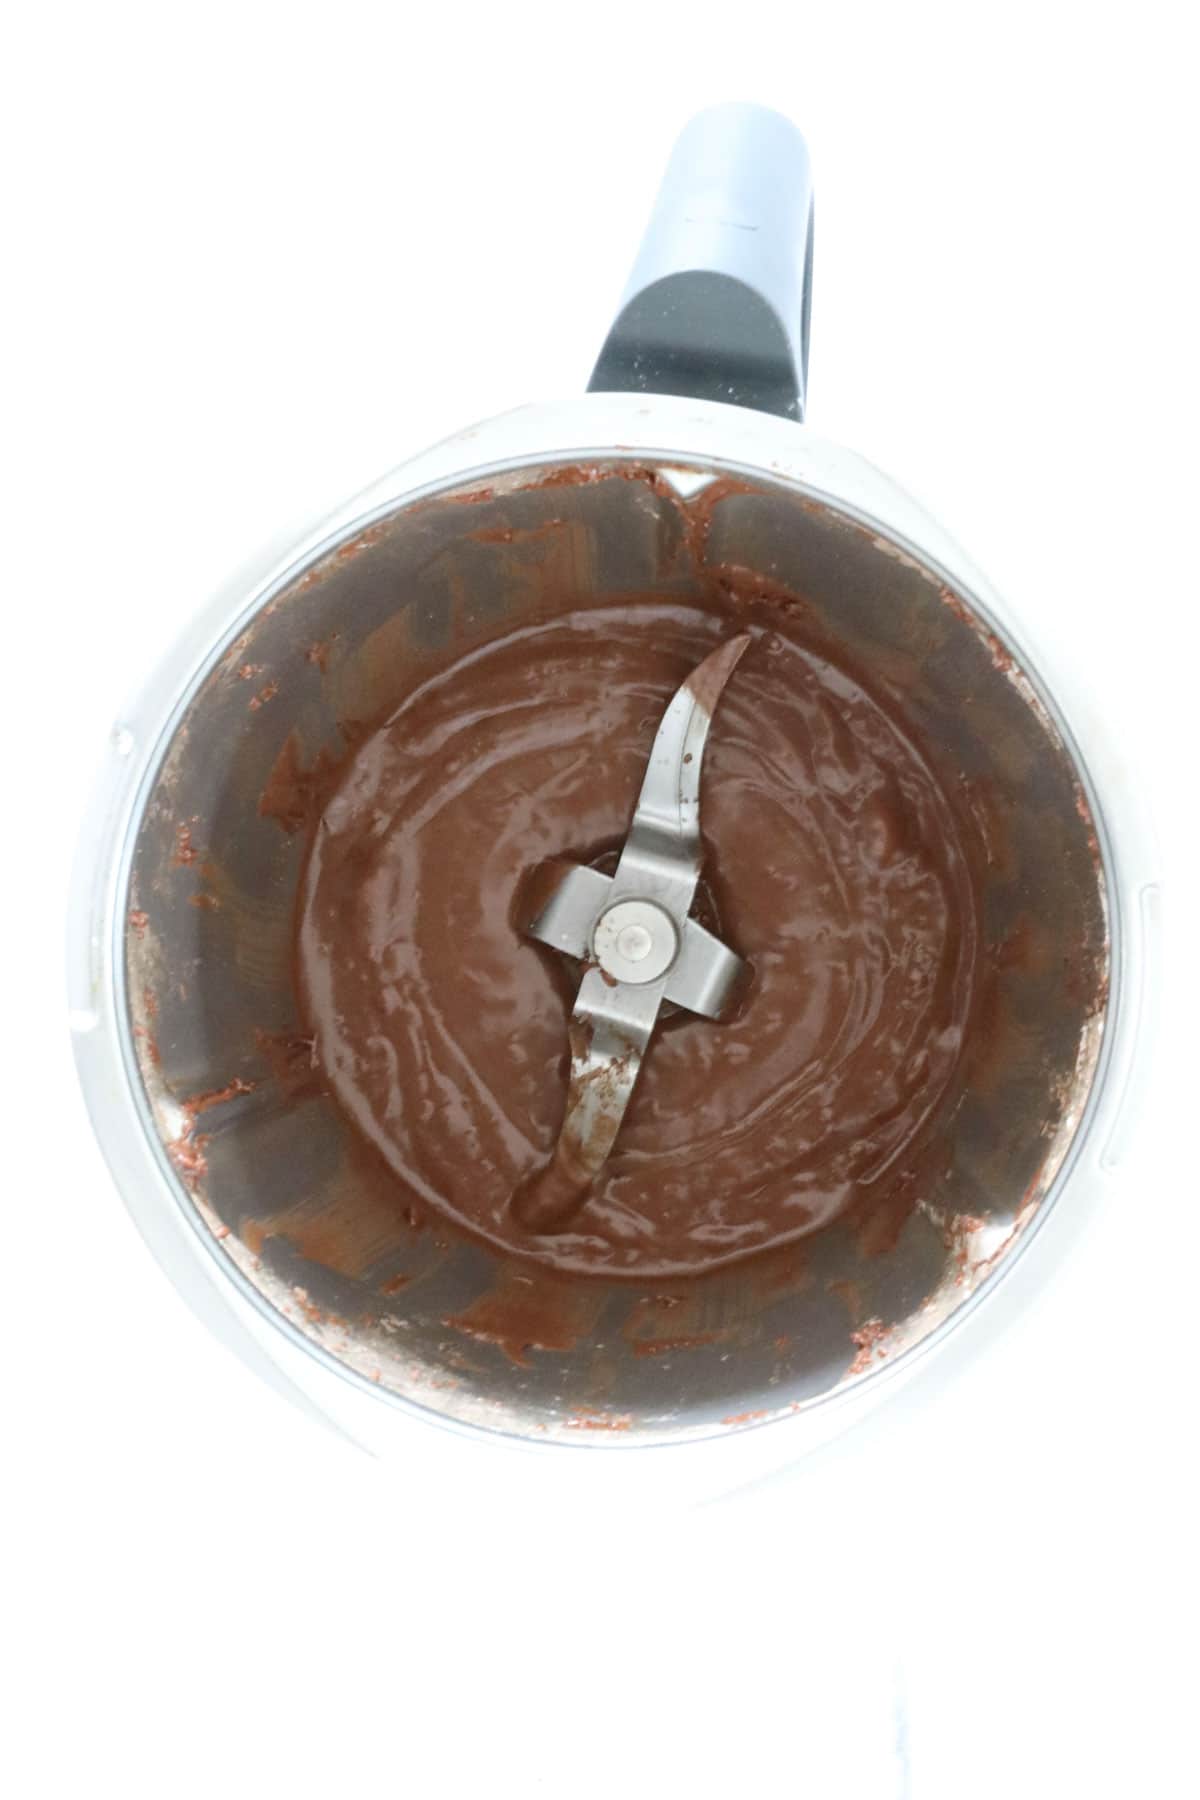 Melted chocolate in a bowl.